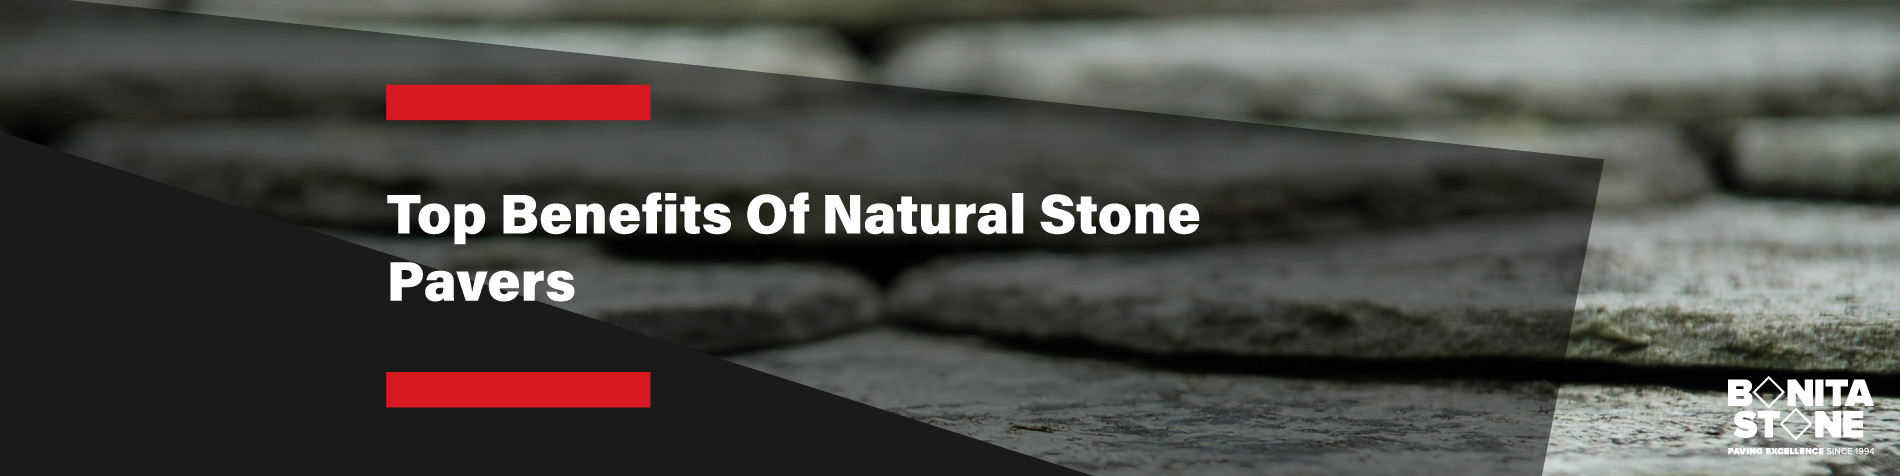 top-benefits-of-natural-stone-pavers-banner